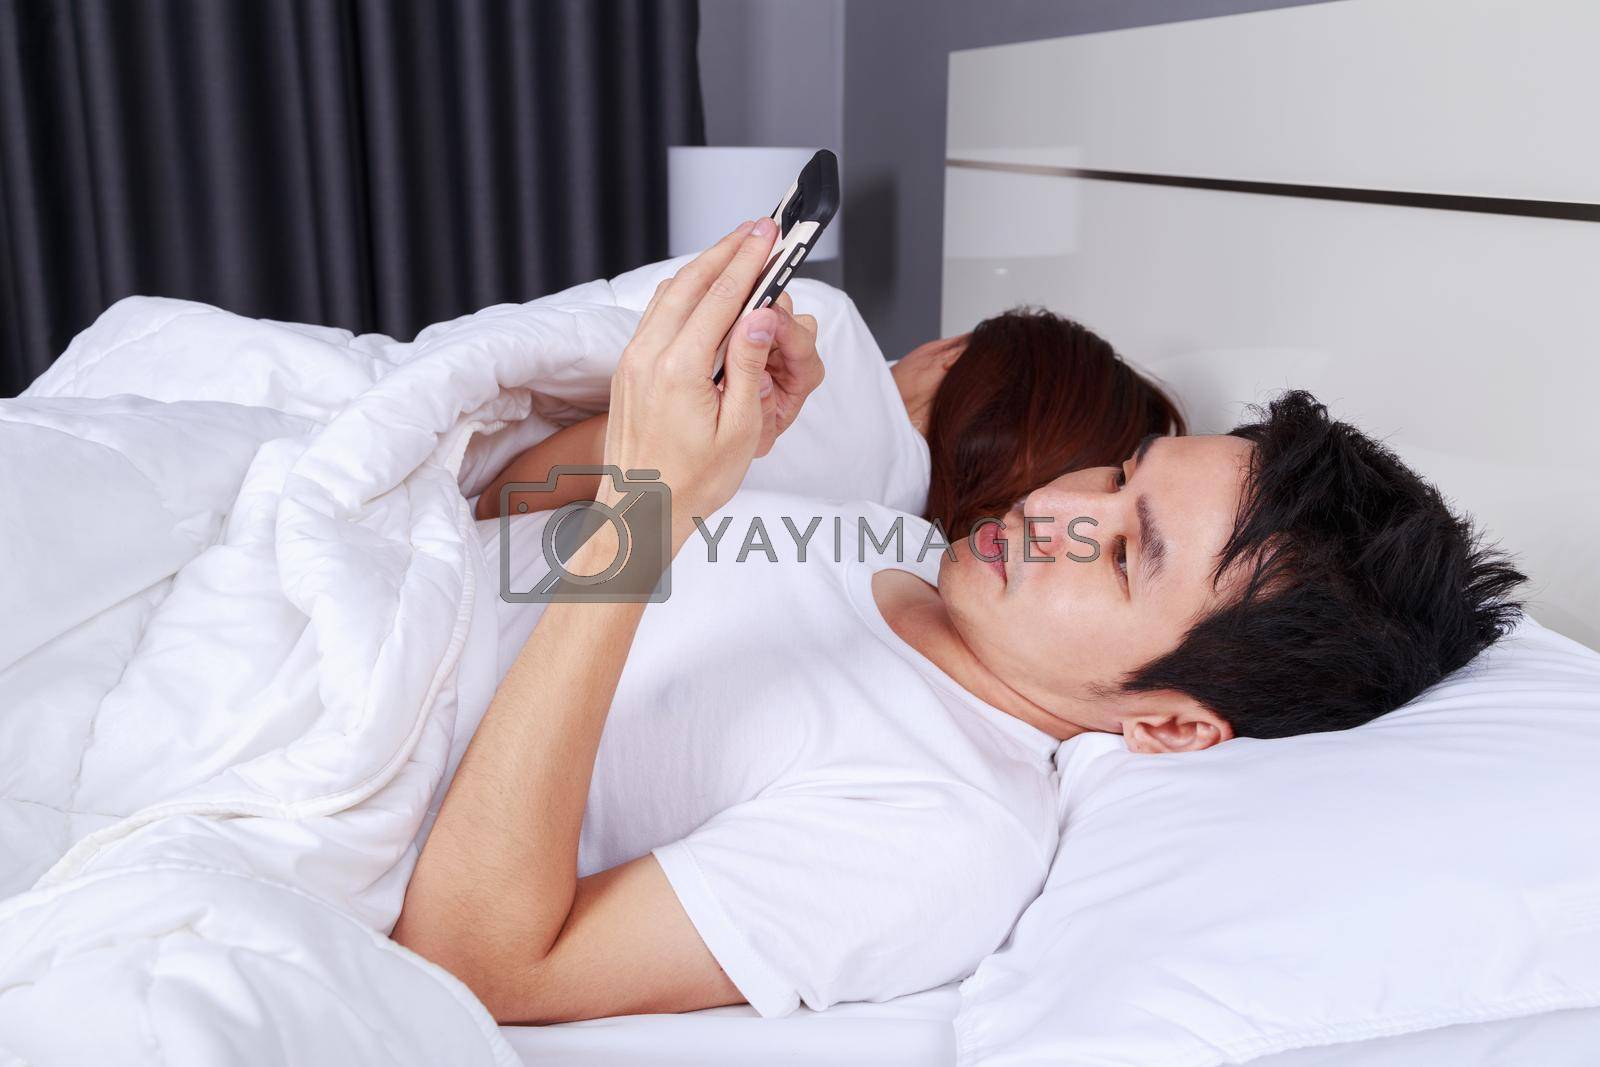 Royalty free image of man using his mobile phone in bed while his wife is sleeping next to him by geargodz